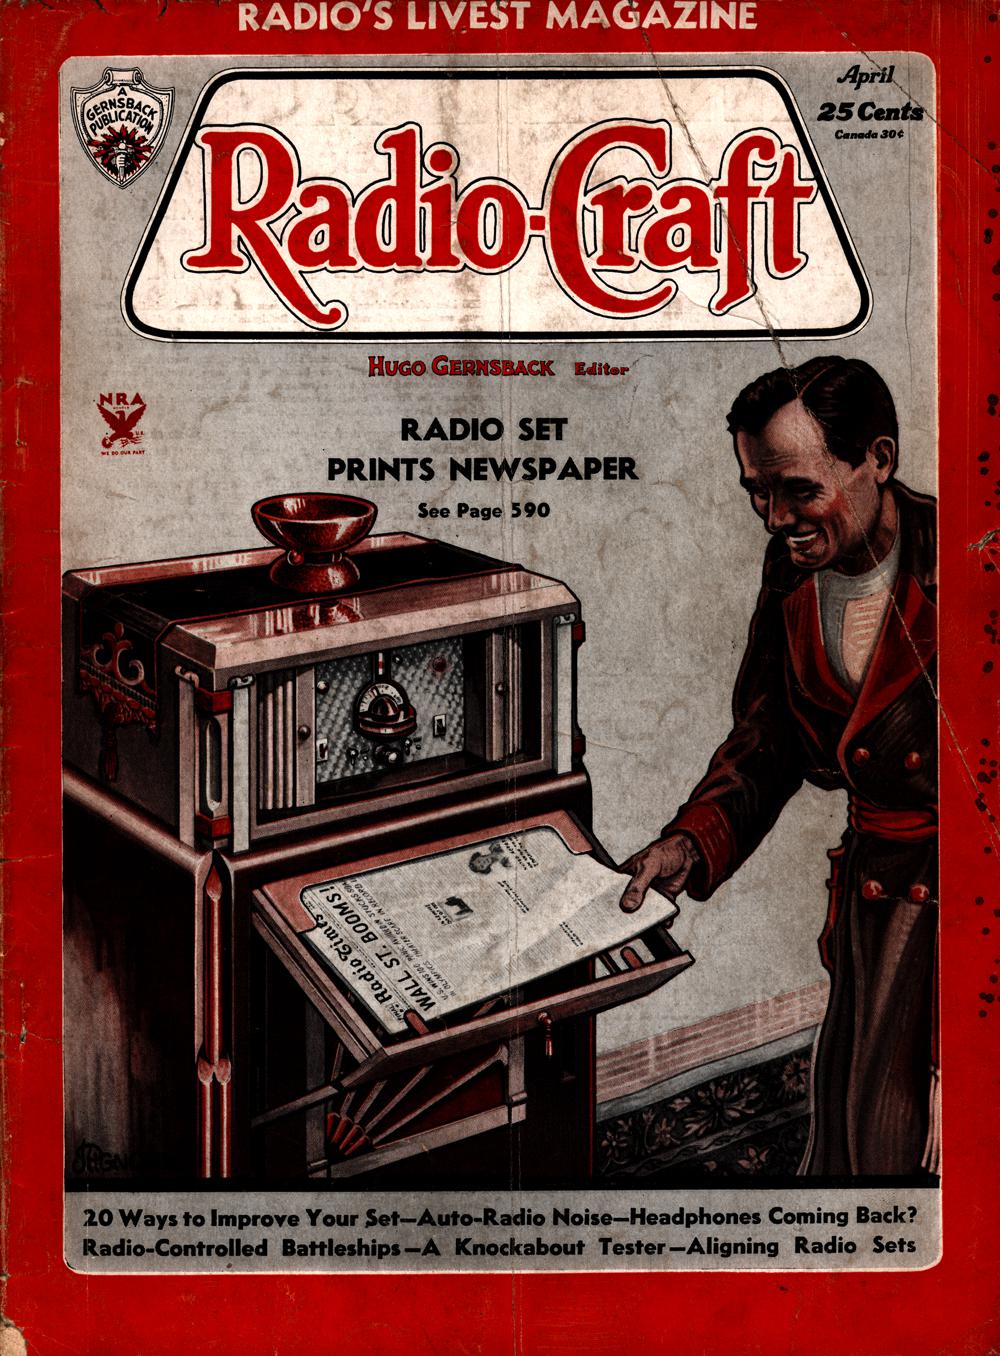 1934 - Radio-craft. and popular electronics; radio-electronics in all its phases - Vol. 5, No. 10